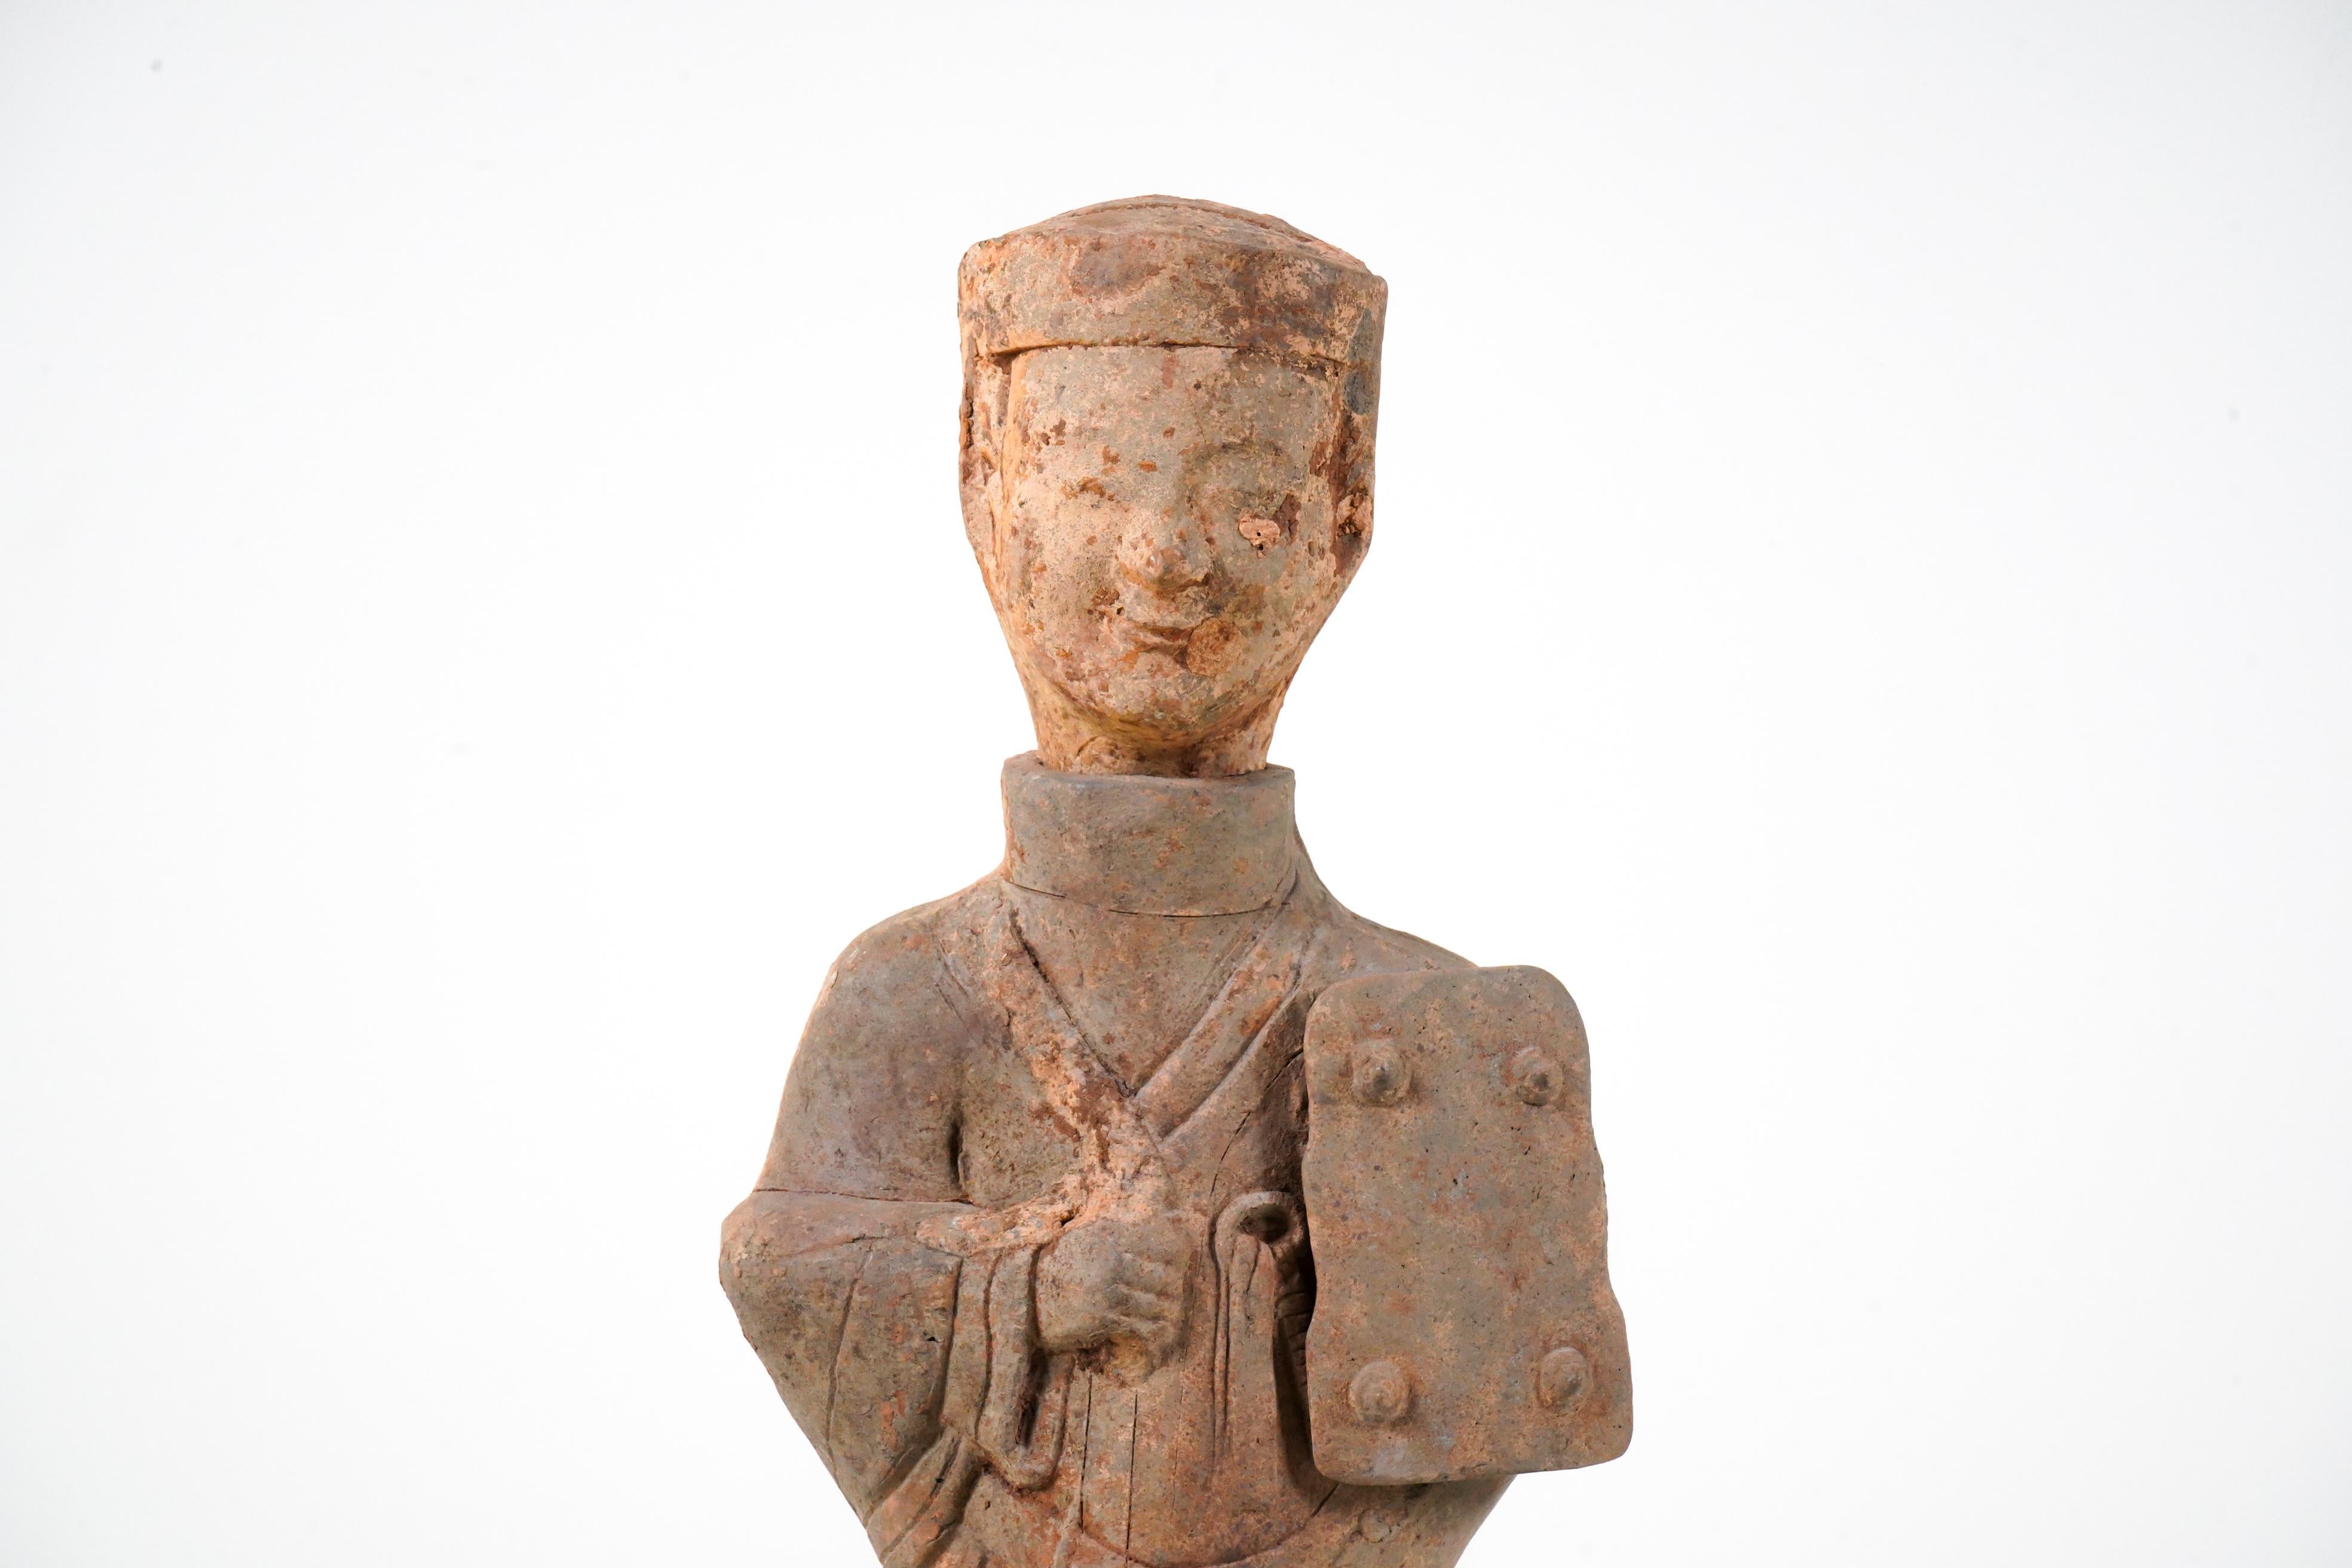 A large Chinese terracotta tomb figure (Ni Yong) from the Eastern Han Dynasty (25-220 AD), likely from the area of modern-day Sichuan. It appears to depict a groom in full costume and harness in hand. With a flat top hat and knotted robe, the figure